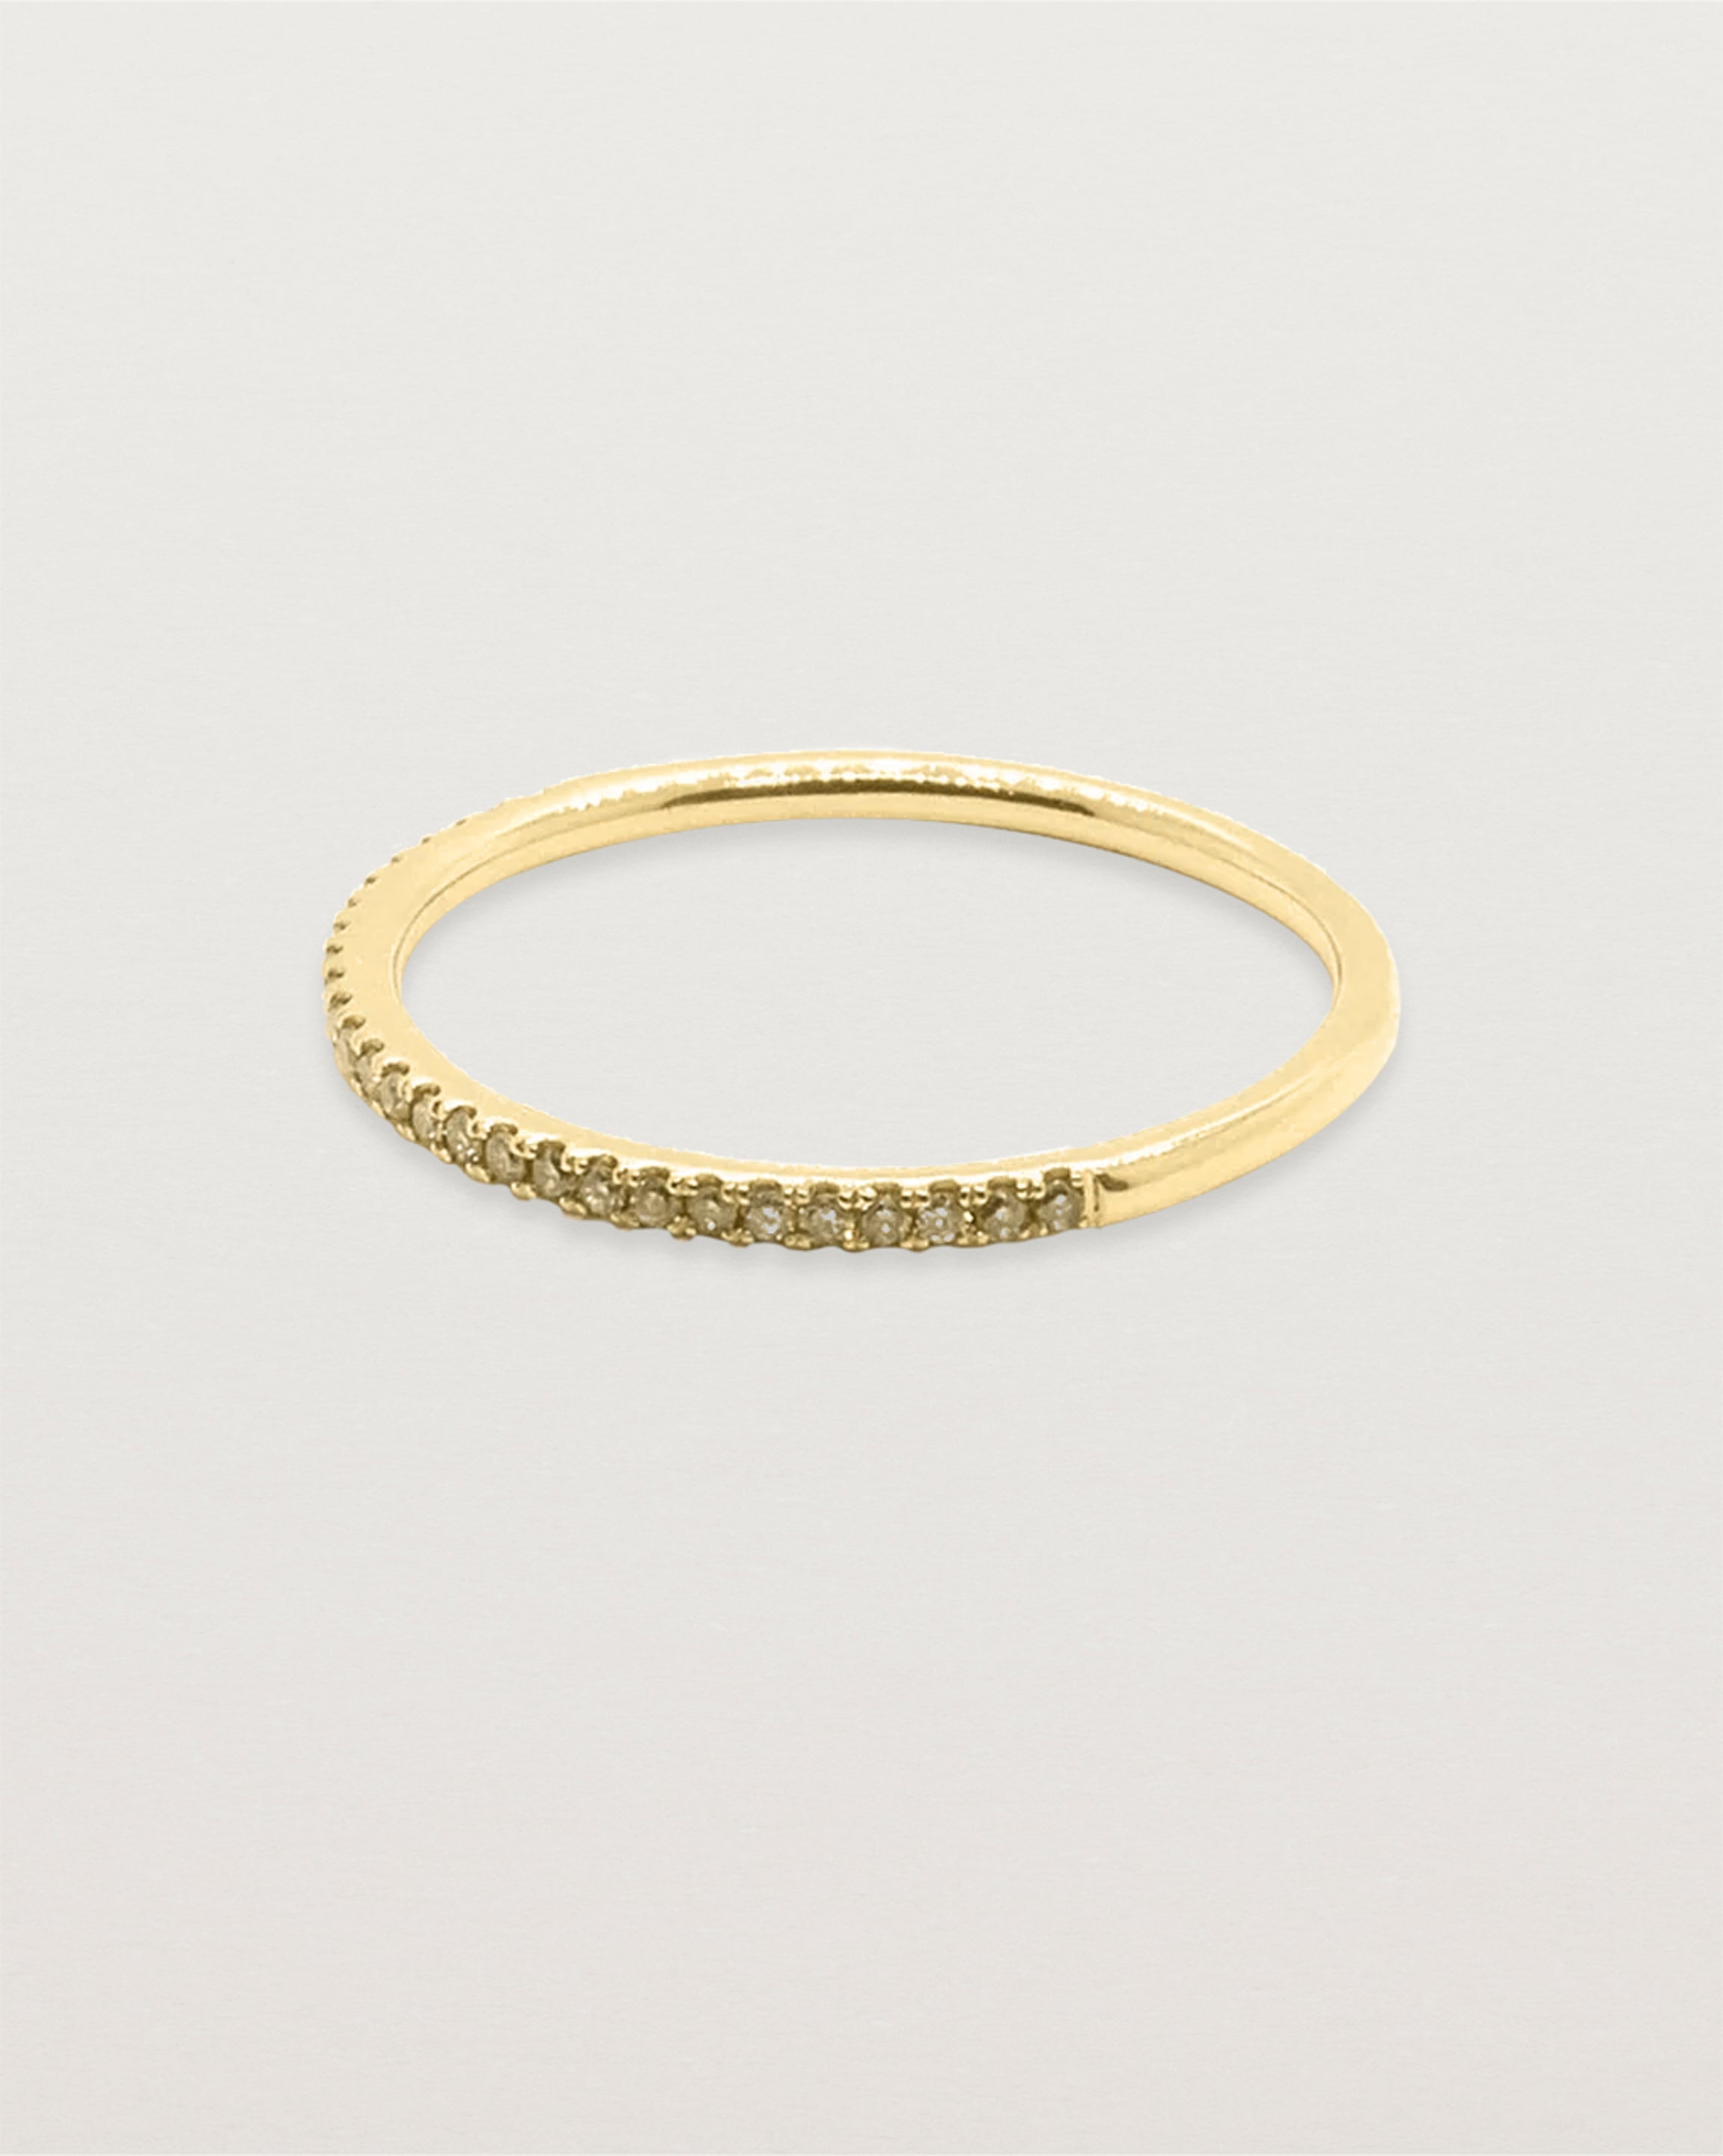 A half band of champagne diamonds set on a yellow gold ring